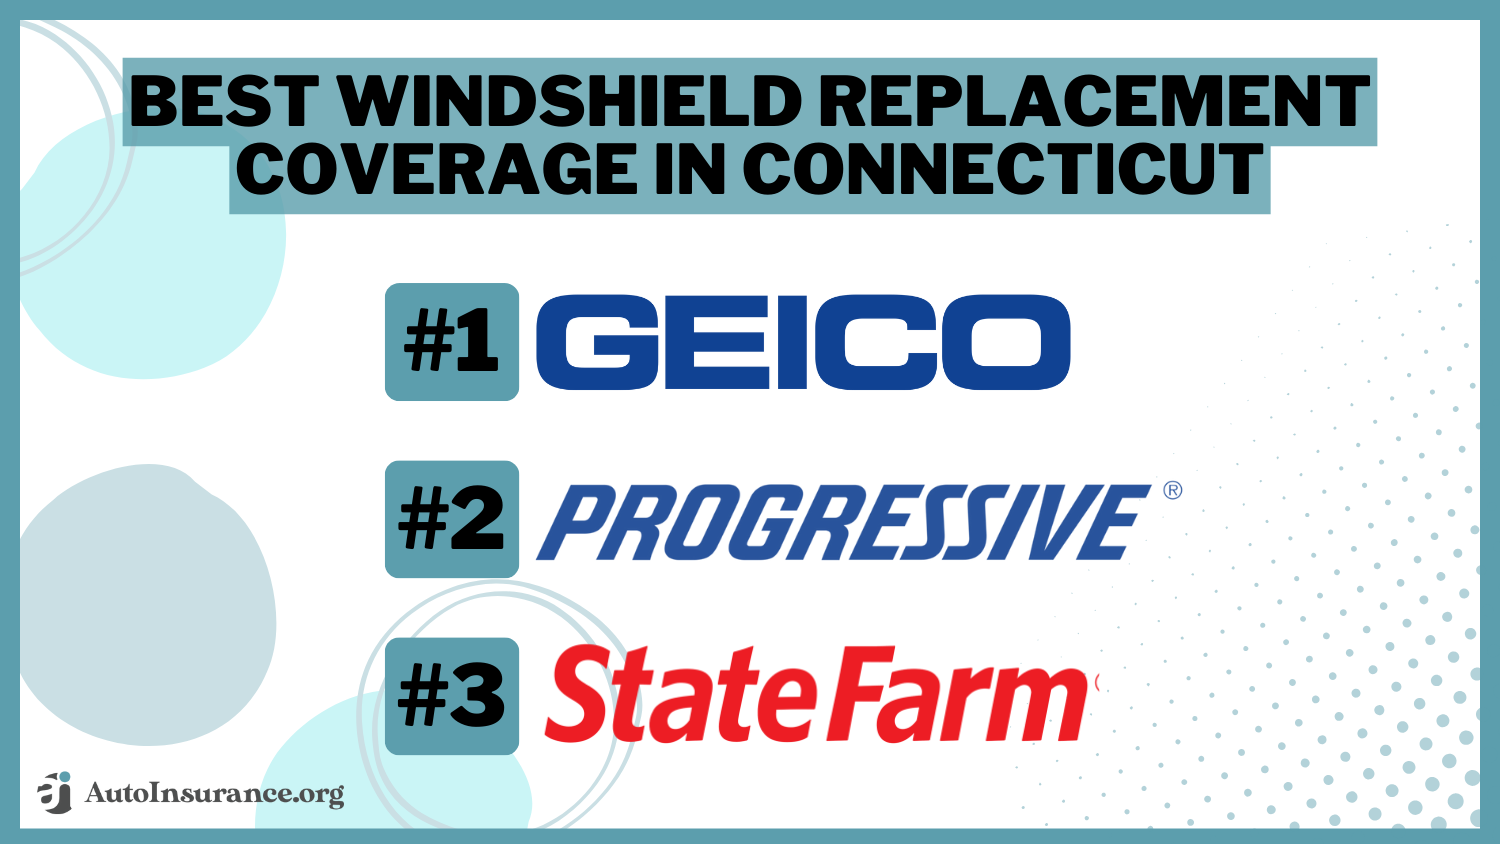 Best Windshield Replacement Coverage in Connecticut: Geico, Progressive, and State Farm